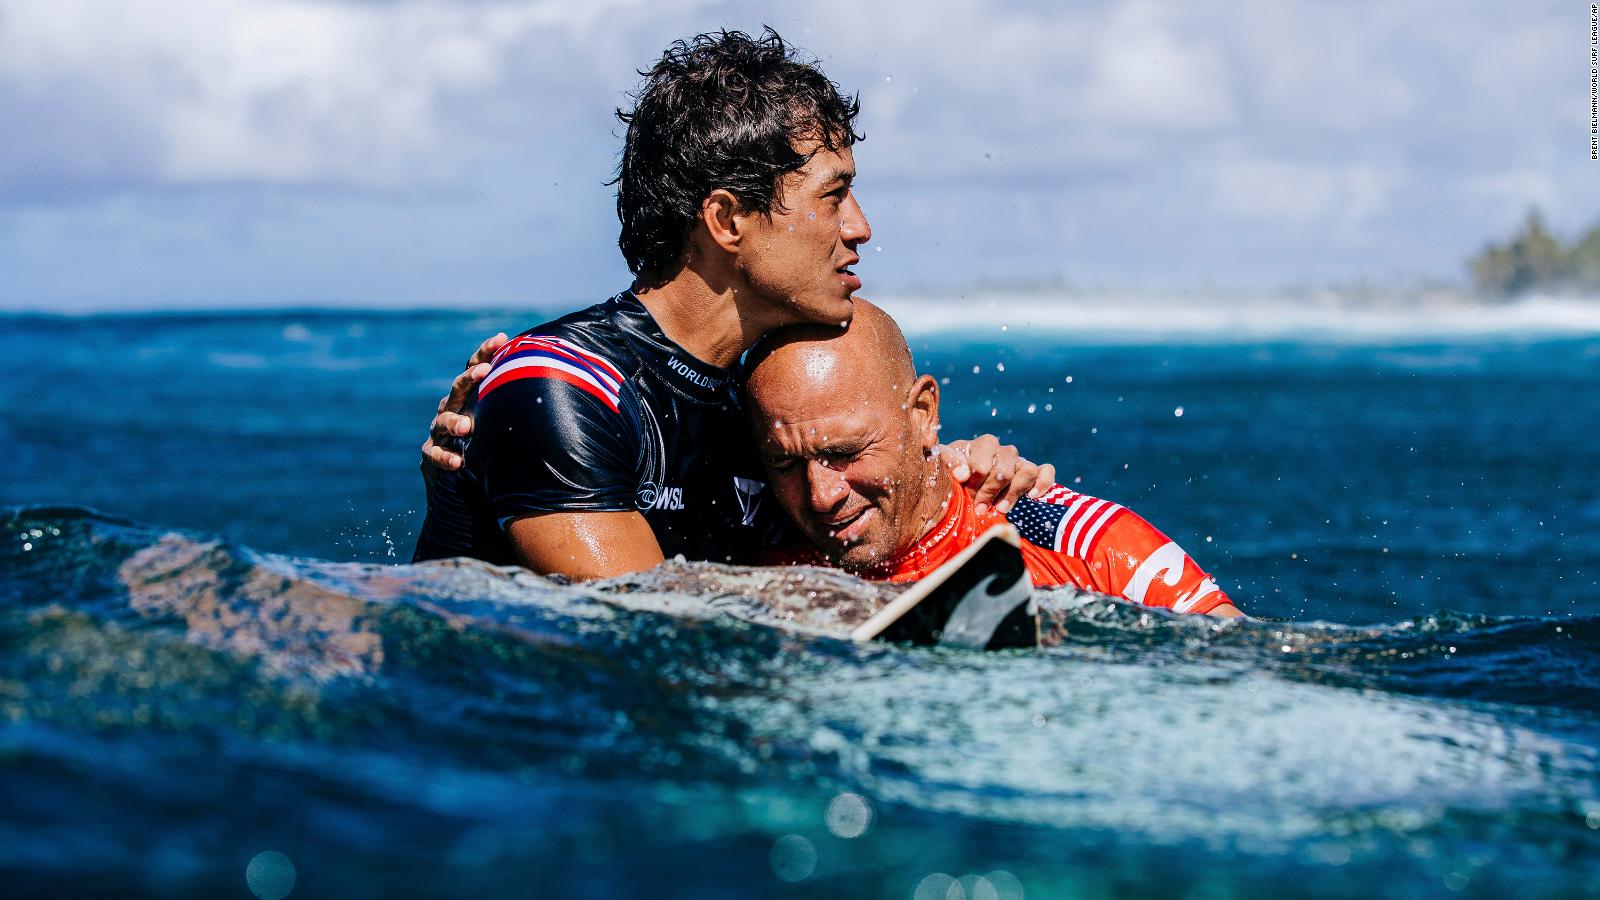 Kelly Slater Surfing great wins Billabong Pro Pipeline days before his